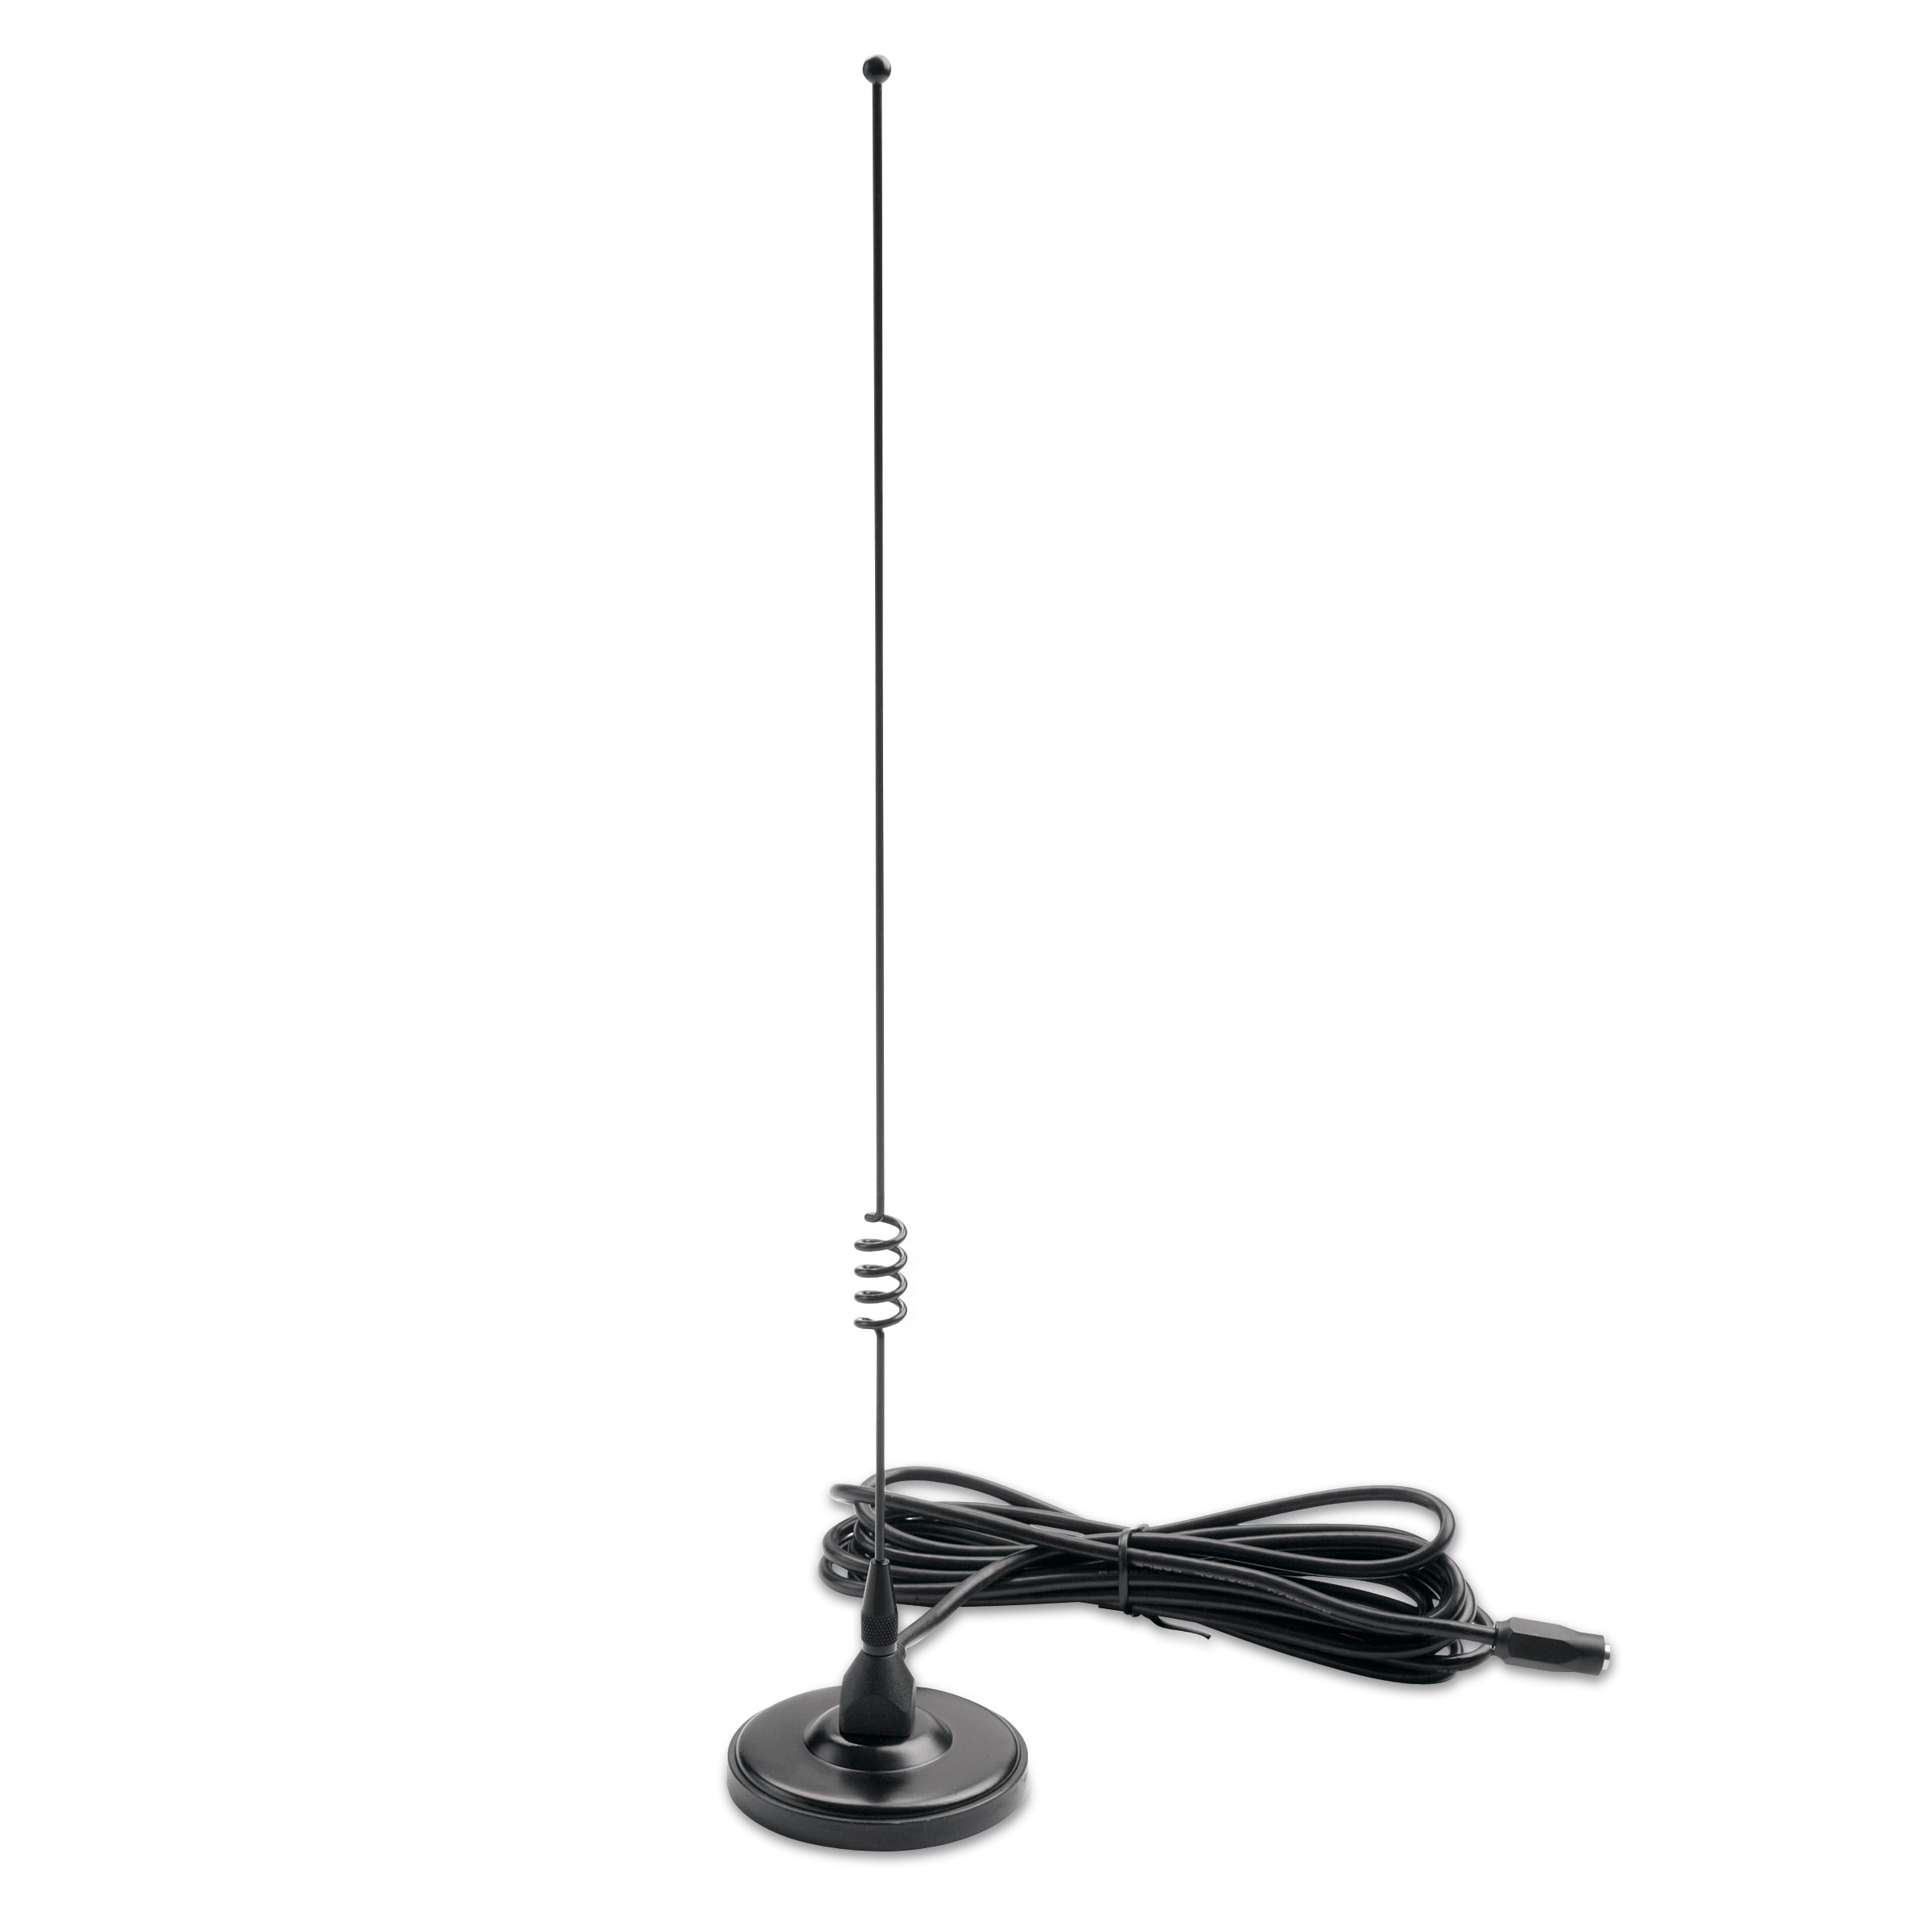 Acc Mag Mount Antenna Astro Garmin -  - Mansfield Hunting & Fishing - Products to prepare for Corona Virus